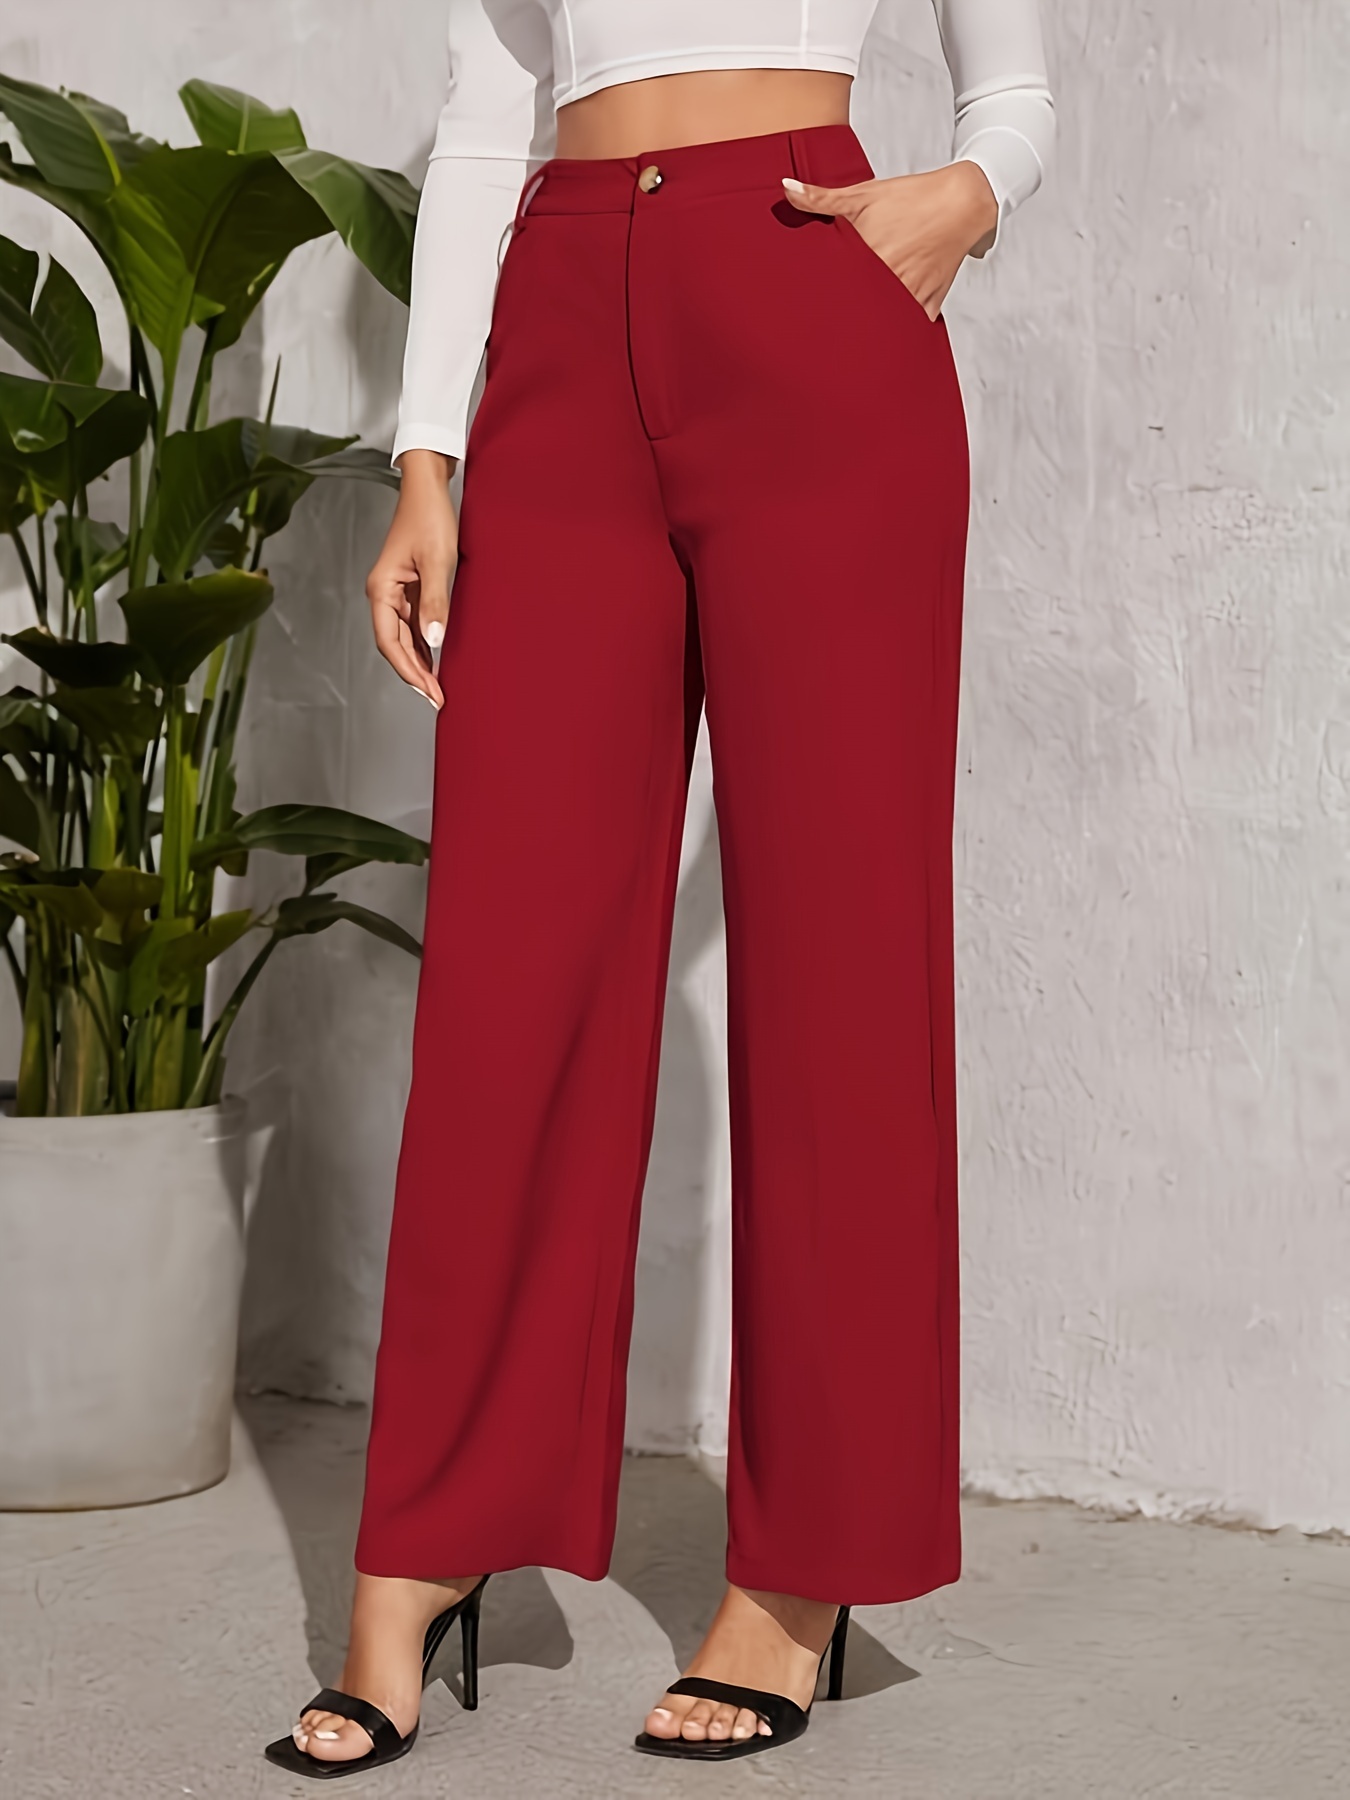 Pintuck Straight Leg Pants, Maroon – Everyday Chic Boutique